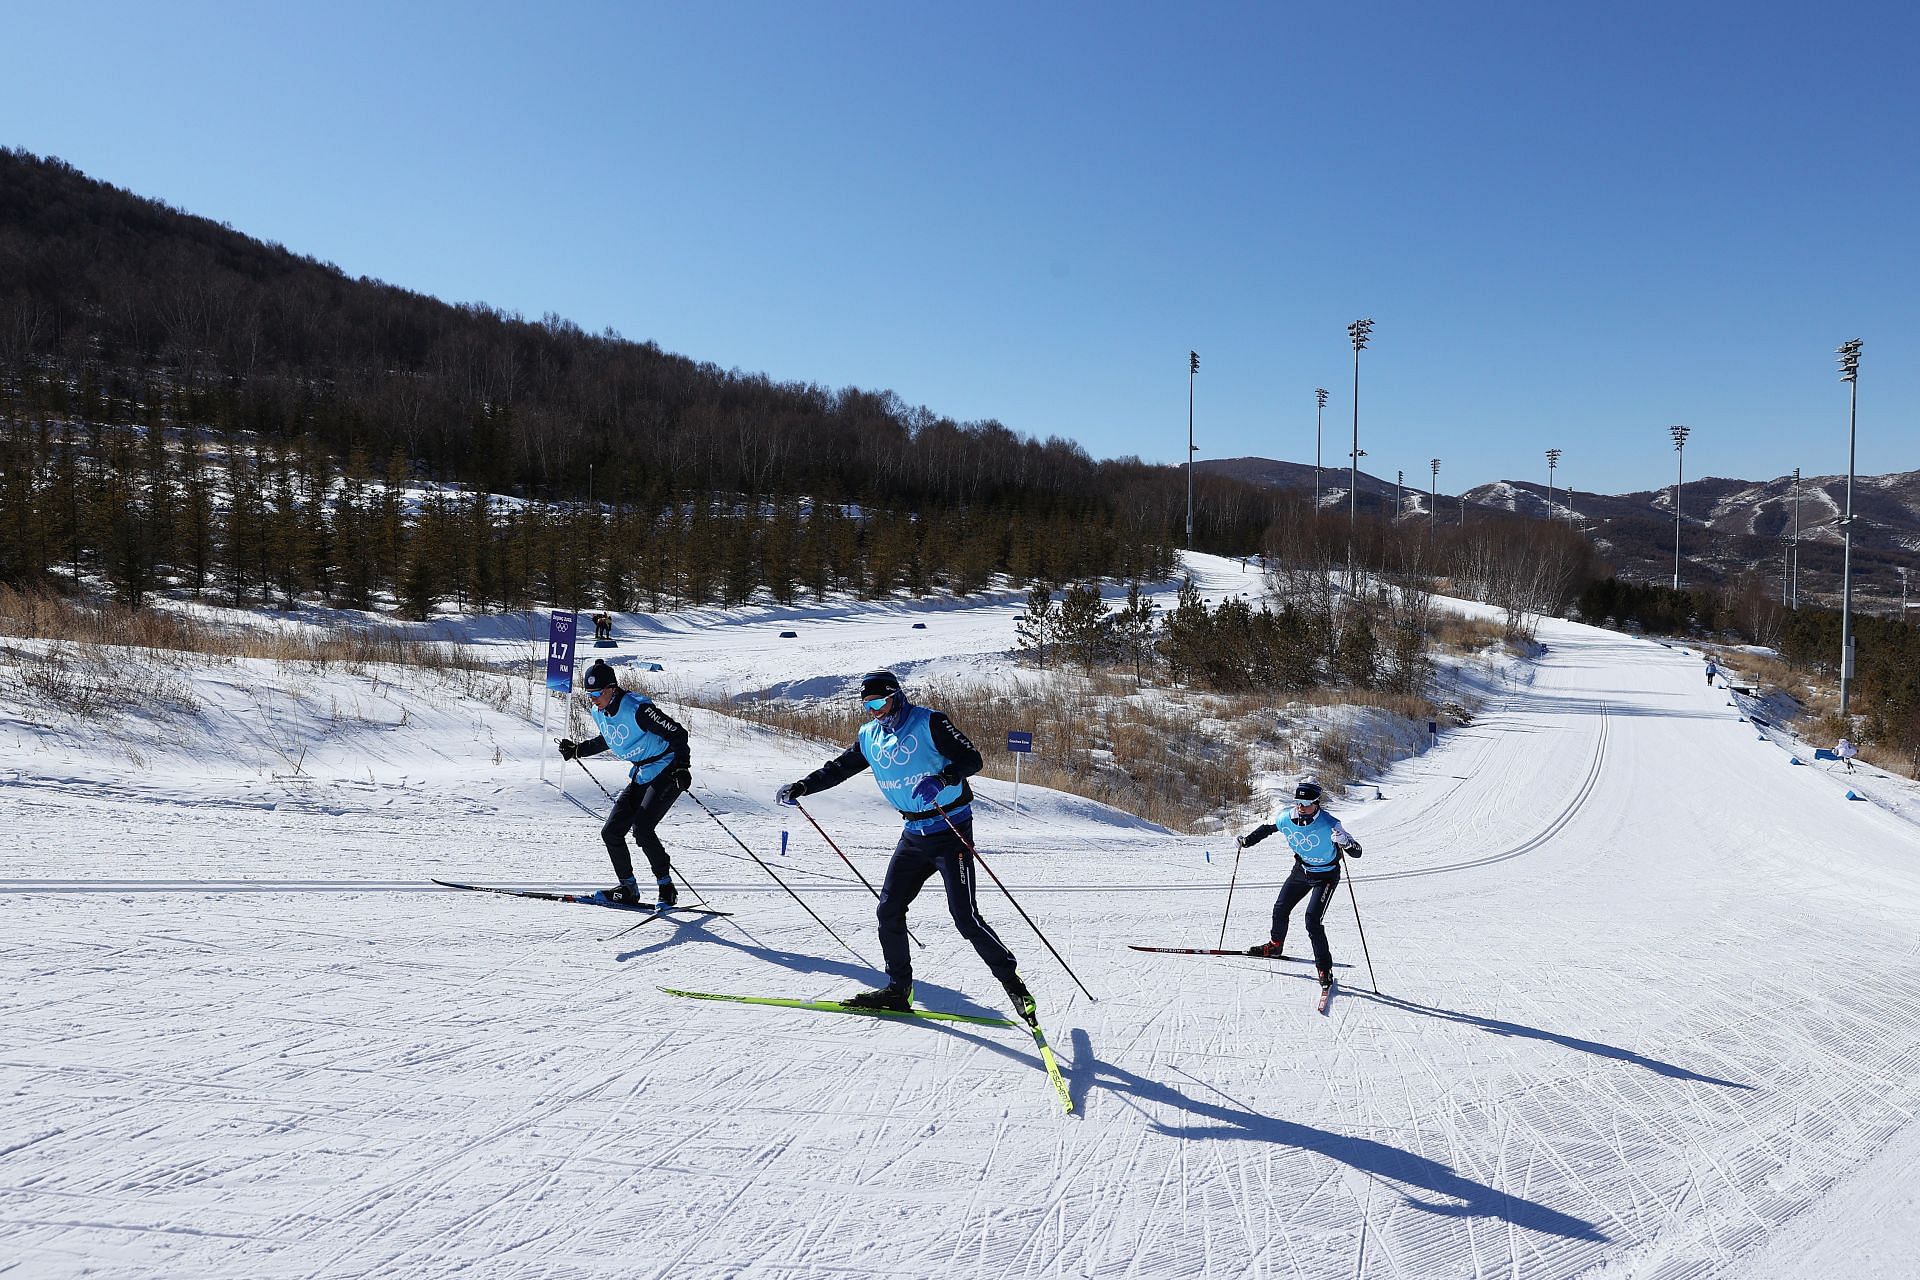 Beijing 2022 Winter Olympics - Previews - Day -2 - Cross-Country Skiing Training